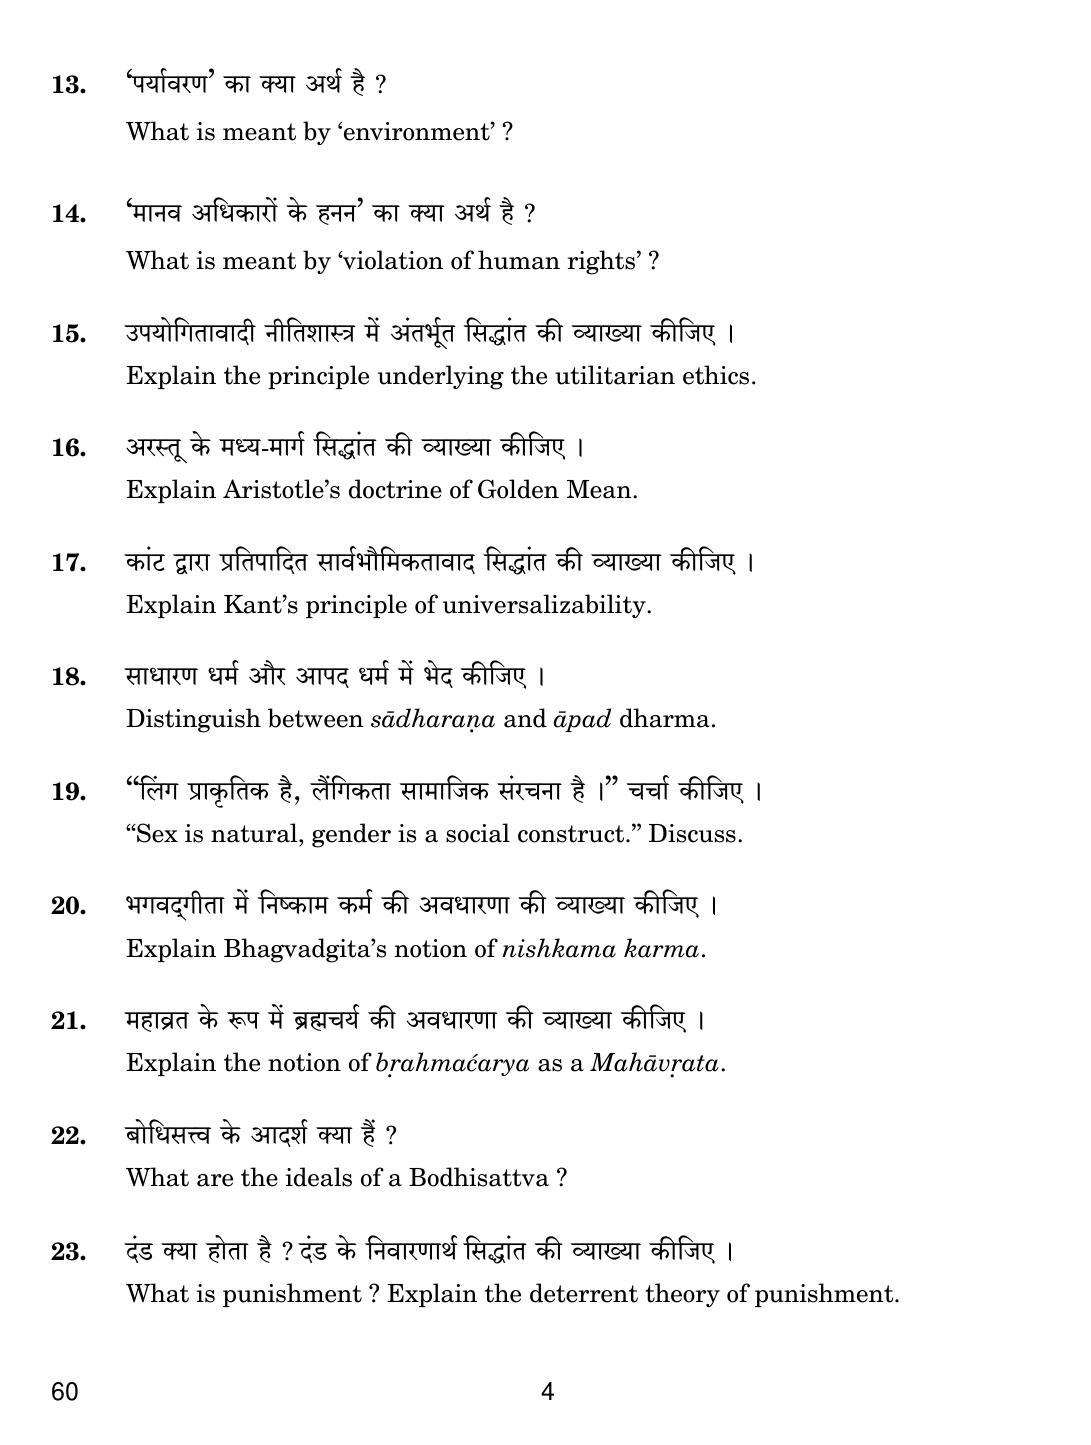 CBSE Class 12 60 Philosophy 2019 Question Paper - Page 4